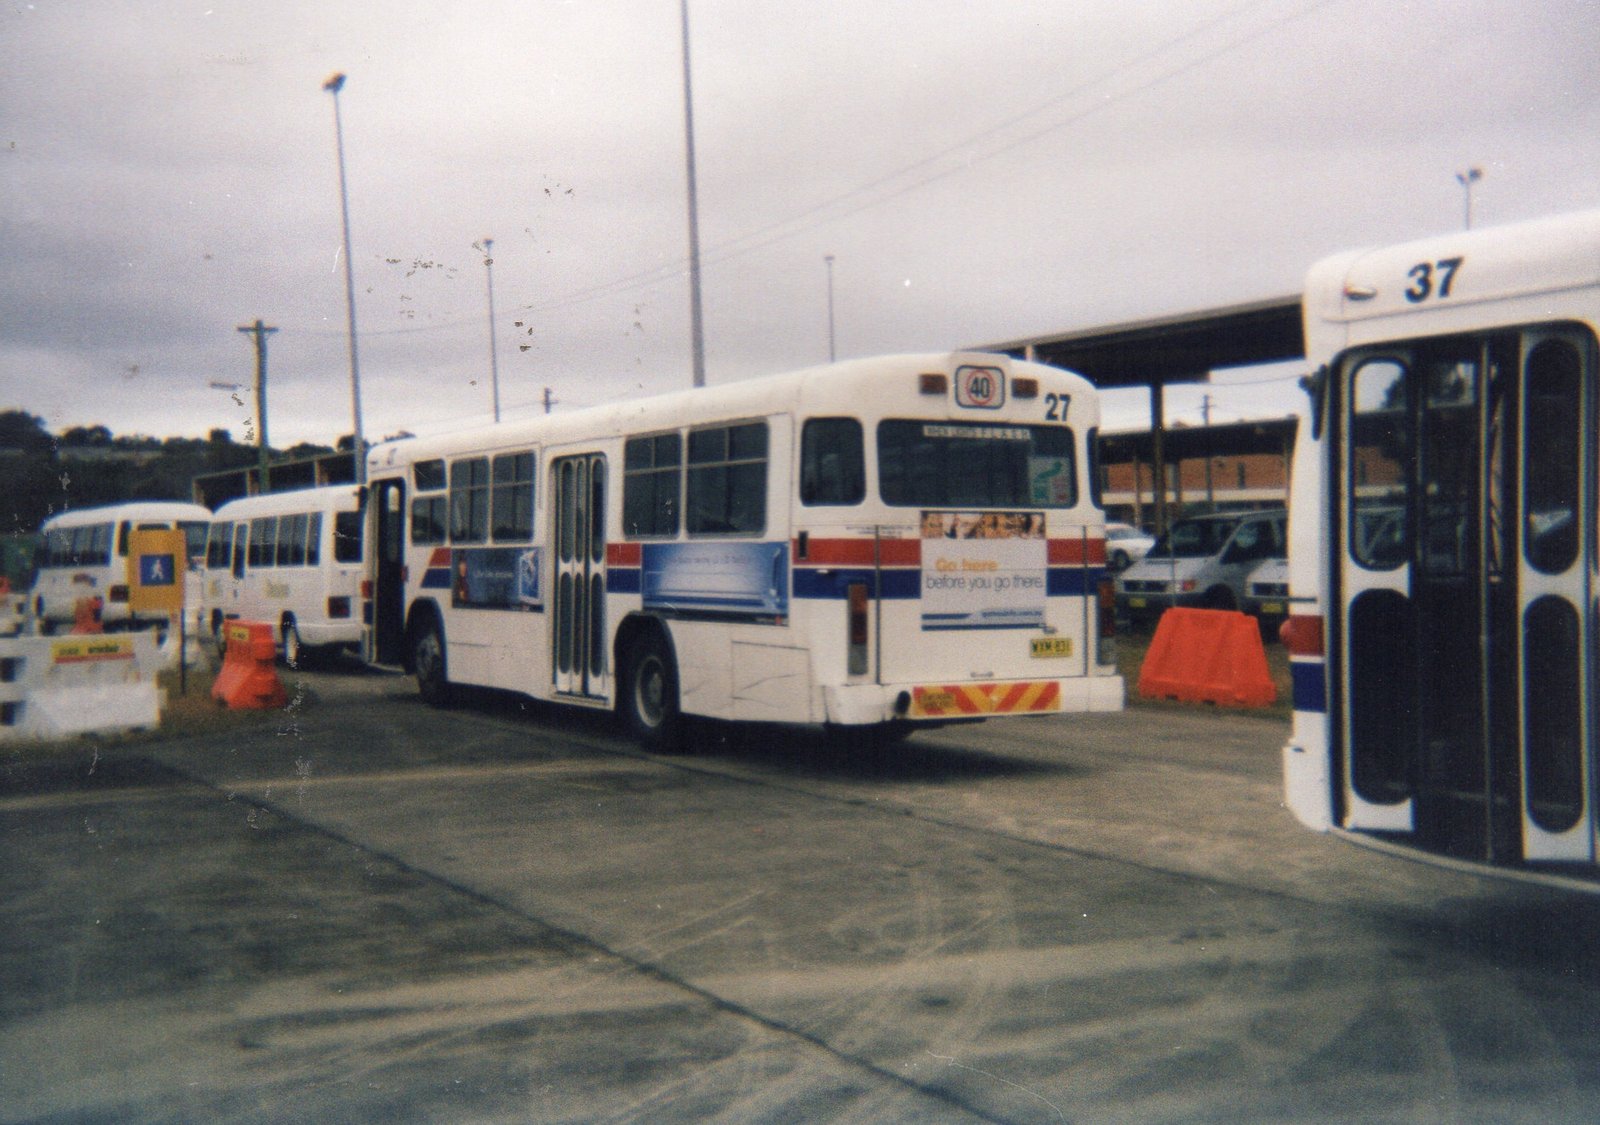 054 Driving buses in Sydney for the olympics 2000.jpg